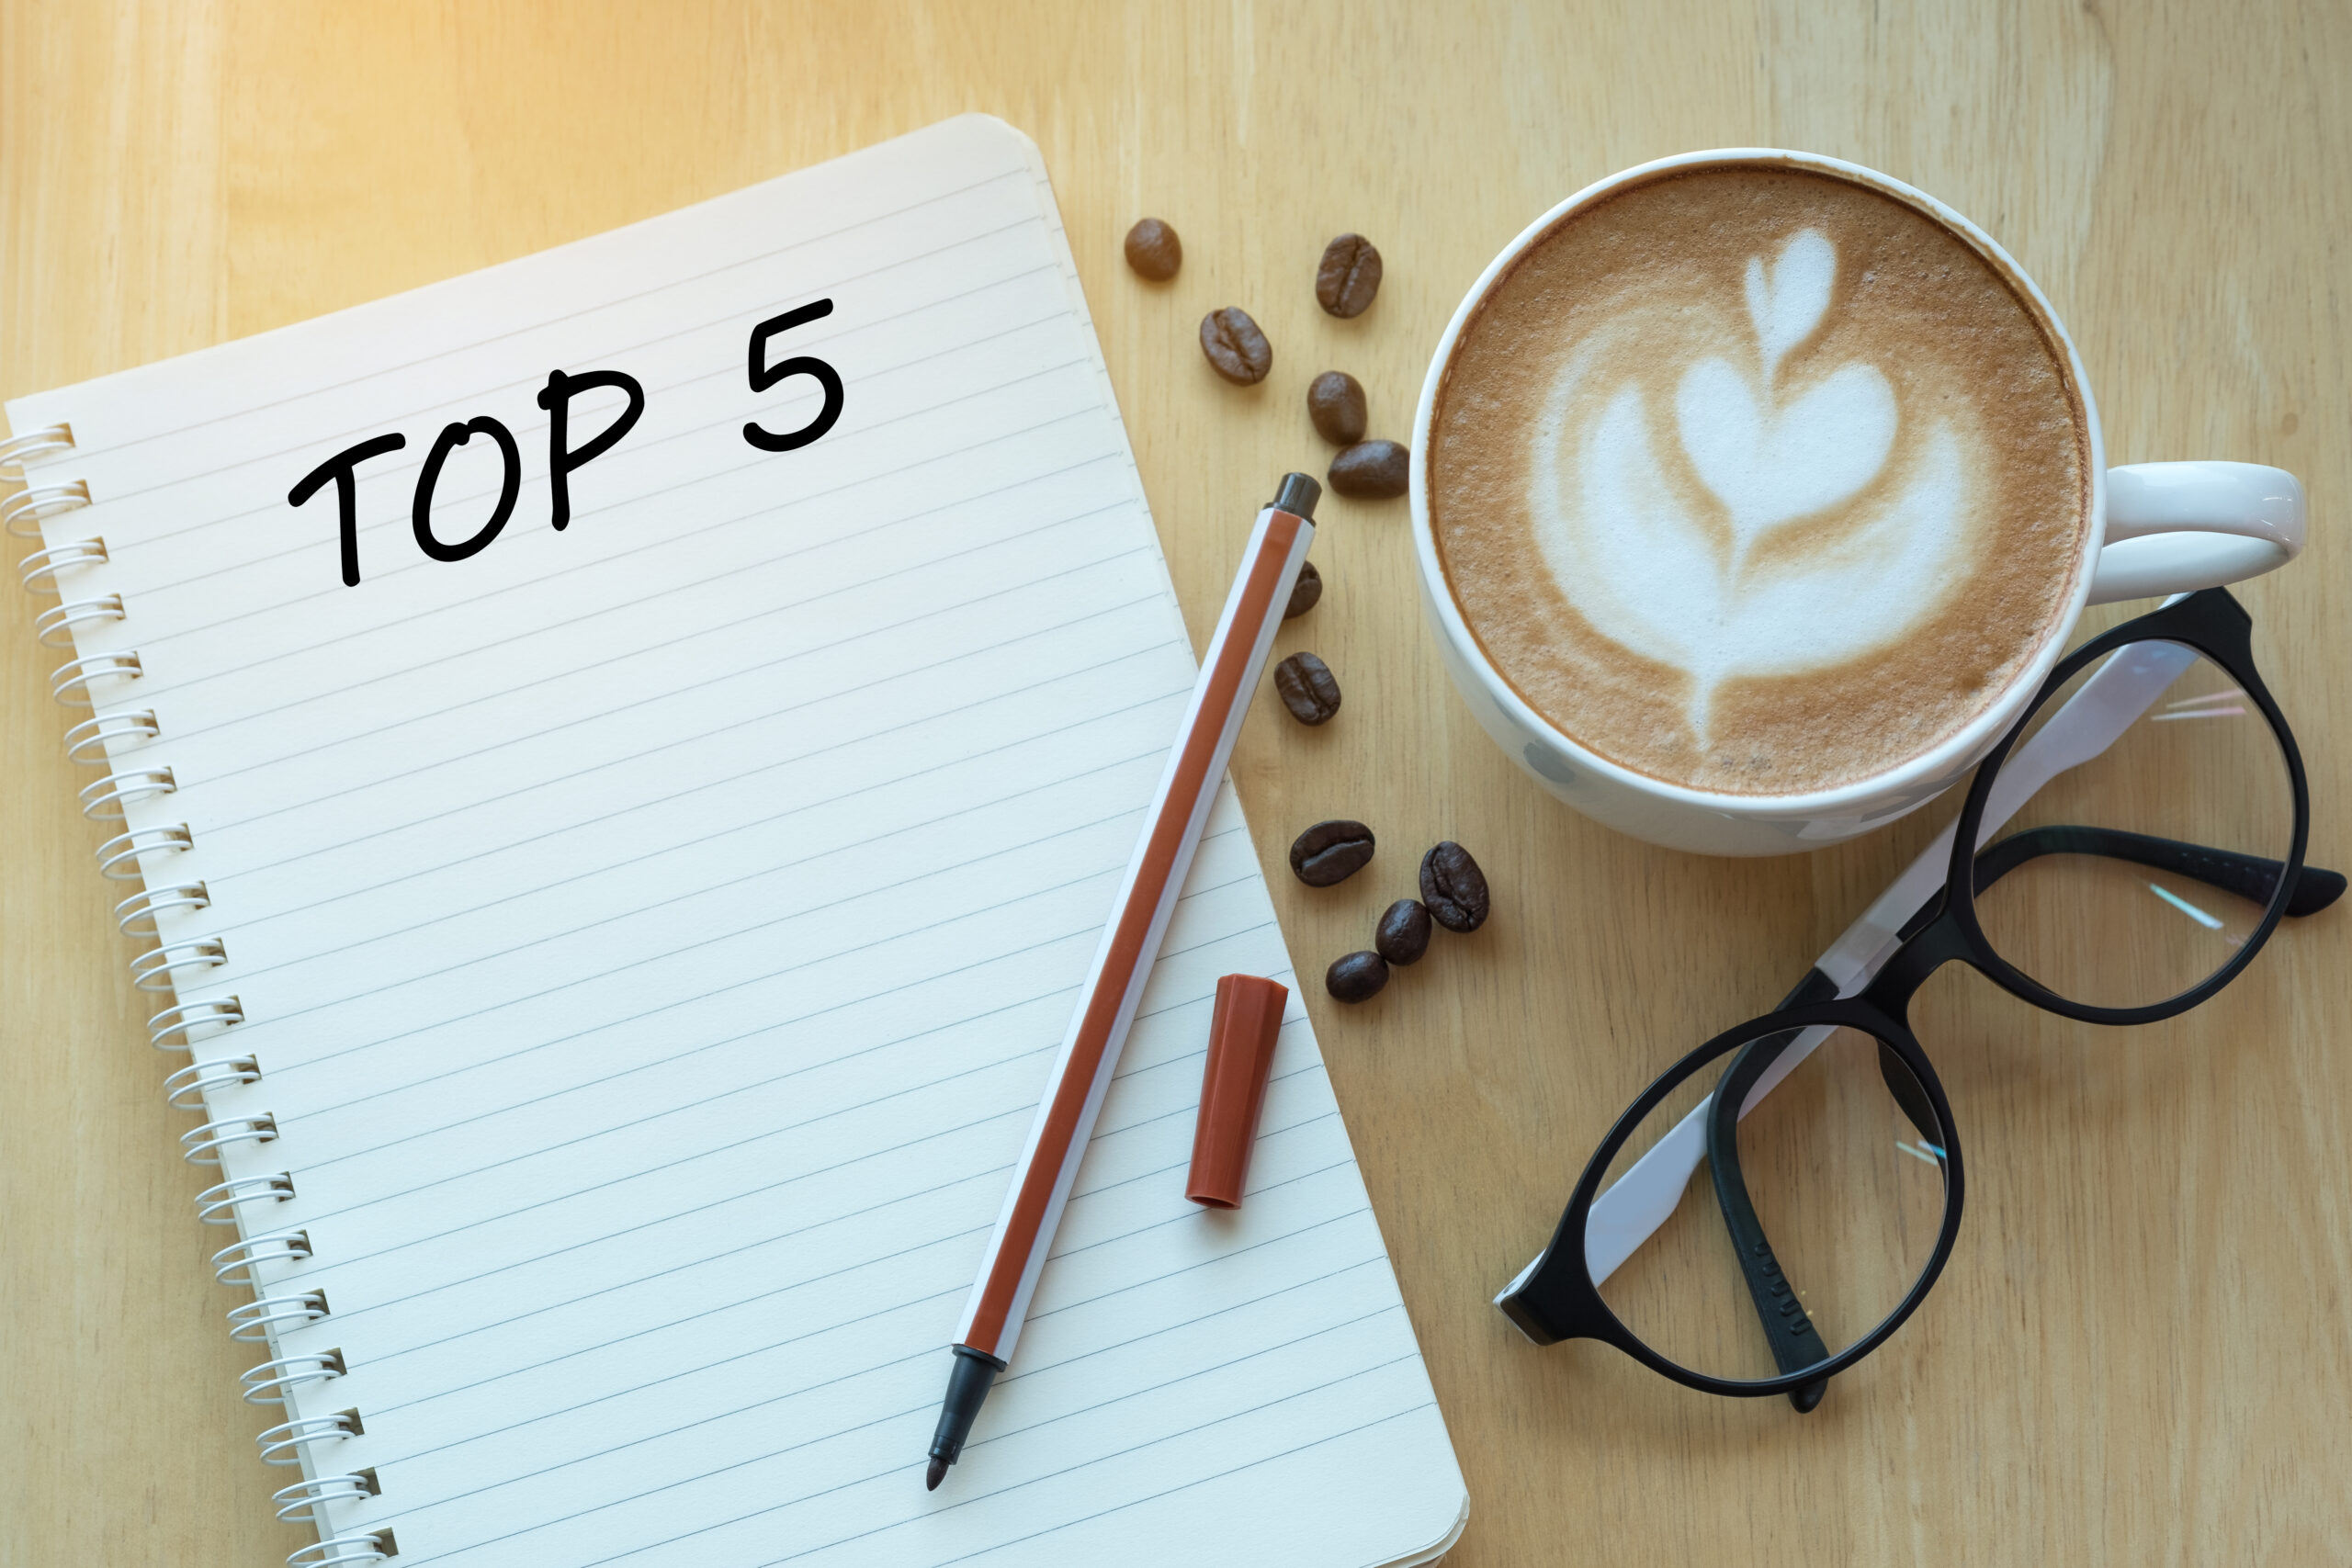 Top-5-Written-On-Notebook-Coffee-Beans-Pen-Glasses-Cup-of-Coffee